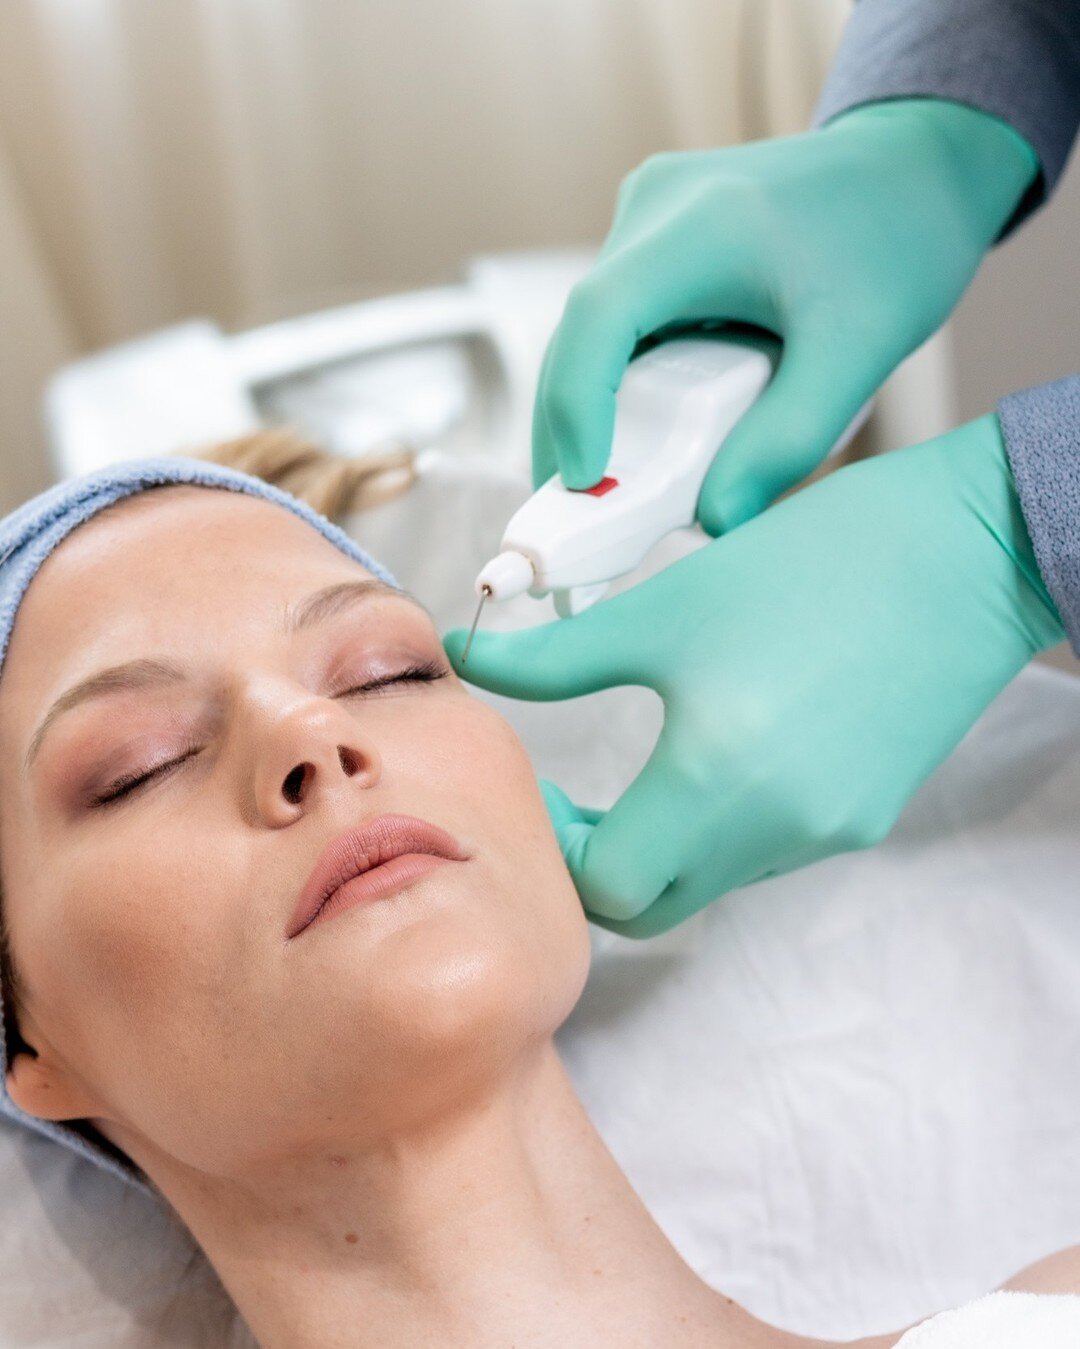 Have you heard of Plexr? Plexr is a non-surgical treatment which offers an effective alternative to surgical procedures such as blepharoplasty (eyelid correction), face/neck lift and scar. Plexr creates a plasma arc to stimulate instant contraction a